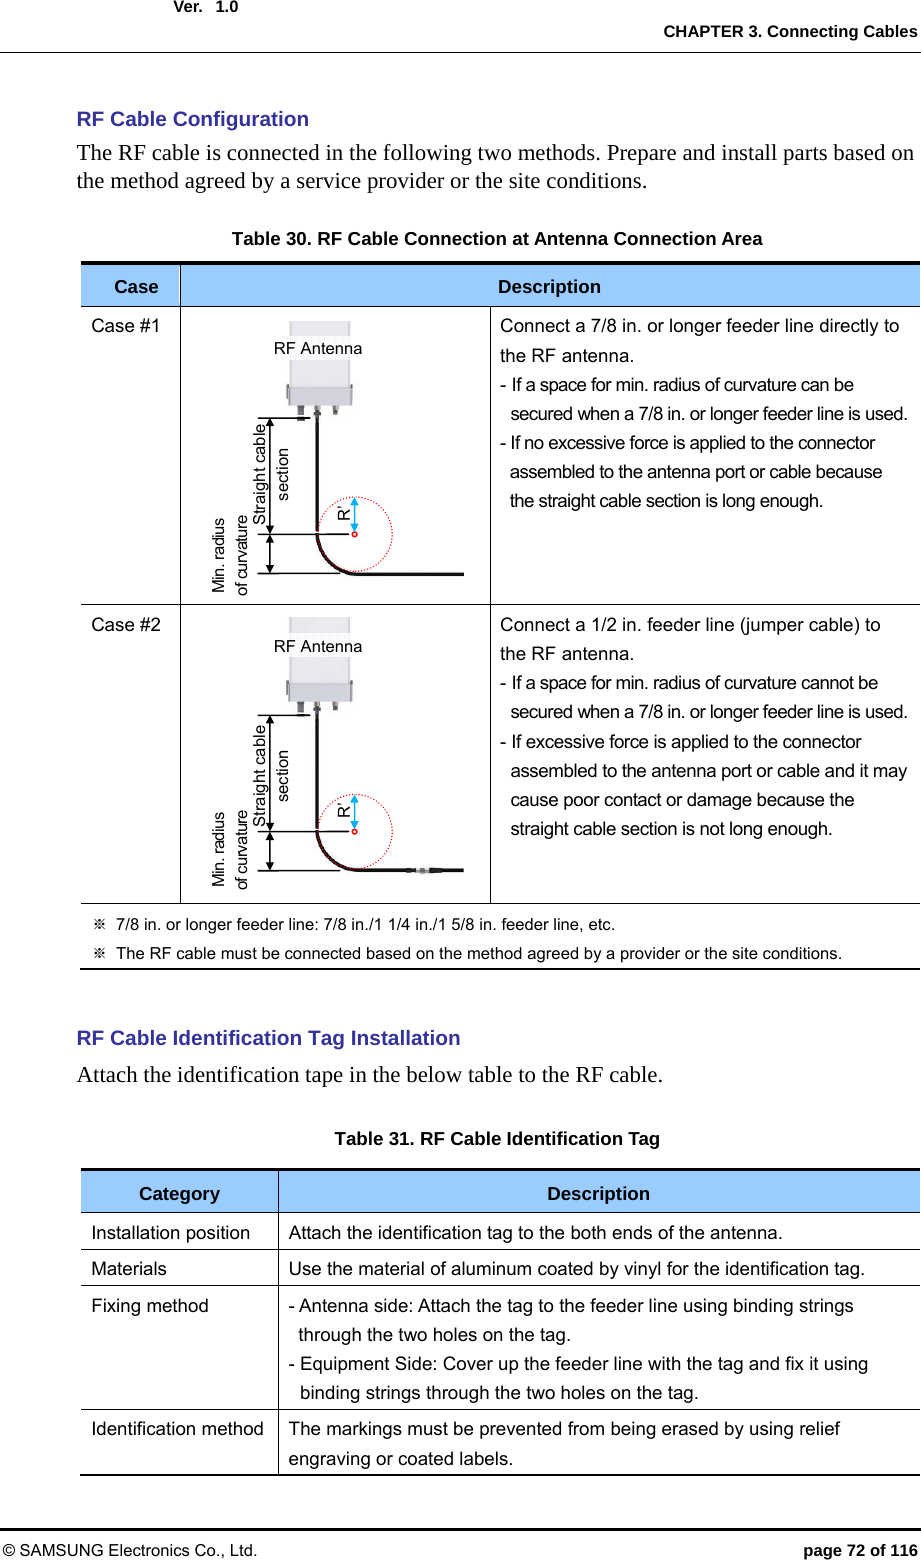  Ver.   CHAPTER 3. Connecting Cables © SAMSUNG Electronics Co., Ltd.  page 72 of 116 1.0RF Cable Configuration The RF cable is connected in the following two methods. Prepare and install parts based on the method agreed by a service provider or the site conditions.  Table 30. RF Cable Connection at Antenna Connection Area Case  Description Case #1            Connect a 7/8 in. or longer feeder line directly to the RF antenna. - If a space for min. radius of curvature can be secured when a 7/8 in. or longer feeder line is used.- If no excessive force is applied to the connector assembled to the antenna port or cable because the straight cable section is long enough. Case #2            Connect a 1/2 in. feeder line (jumper cable) to the RF antenna. - If a space for min. radius of curvature cannot be secured when a 7/8 in. or longer feeder line is used.- If excessive force is applied to the connector assembled to the antenna port or cable and it may cause poor contact or damage because the straight cable section is not long enough. ※  7/8 in. or longer feeder line: 7/8 in./1 1/4 in./1 5/8 in. feeder line, etc. ※  The RF cable must be connected based on the method agreed by a provider or the site conditions.  RF Cable Identification Tag Installation   Attach the identification tape in the below table to the RF cable.    Table 31. RF Cable Identification Tag Category  Description Installation position  Attach the identification tag to the both ends of the antenna.   Materials  Use the material of aluminum coated by vinyl for the identification tag. Fixing method  - Antenna side: Attach the tag to the feeder line using binding strings through the two holes on the tag. - Equipment Side: Cover up the feeder line with the tag and fix it using binding strings through the two holes on the tag. Identification method  The markings must be prevented from being erased by using relief engraving or coated labels. Straight cable section Min. radius   of curvature R’ RF Antenna Straight cable section Min. radius   of curvature R’ RF Antenna 